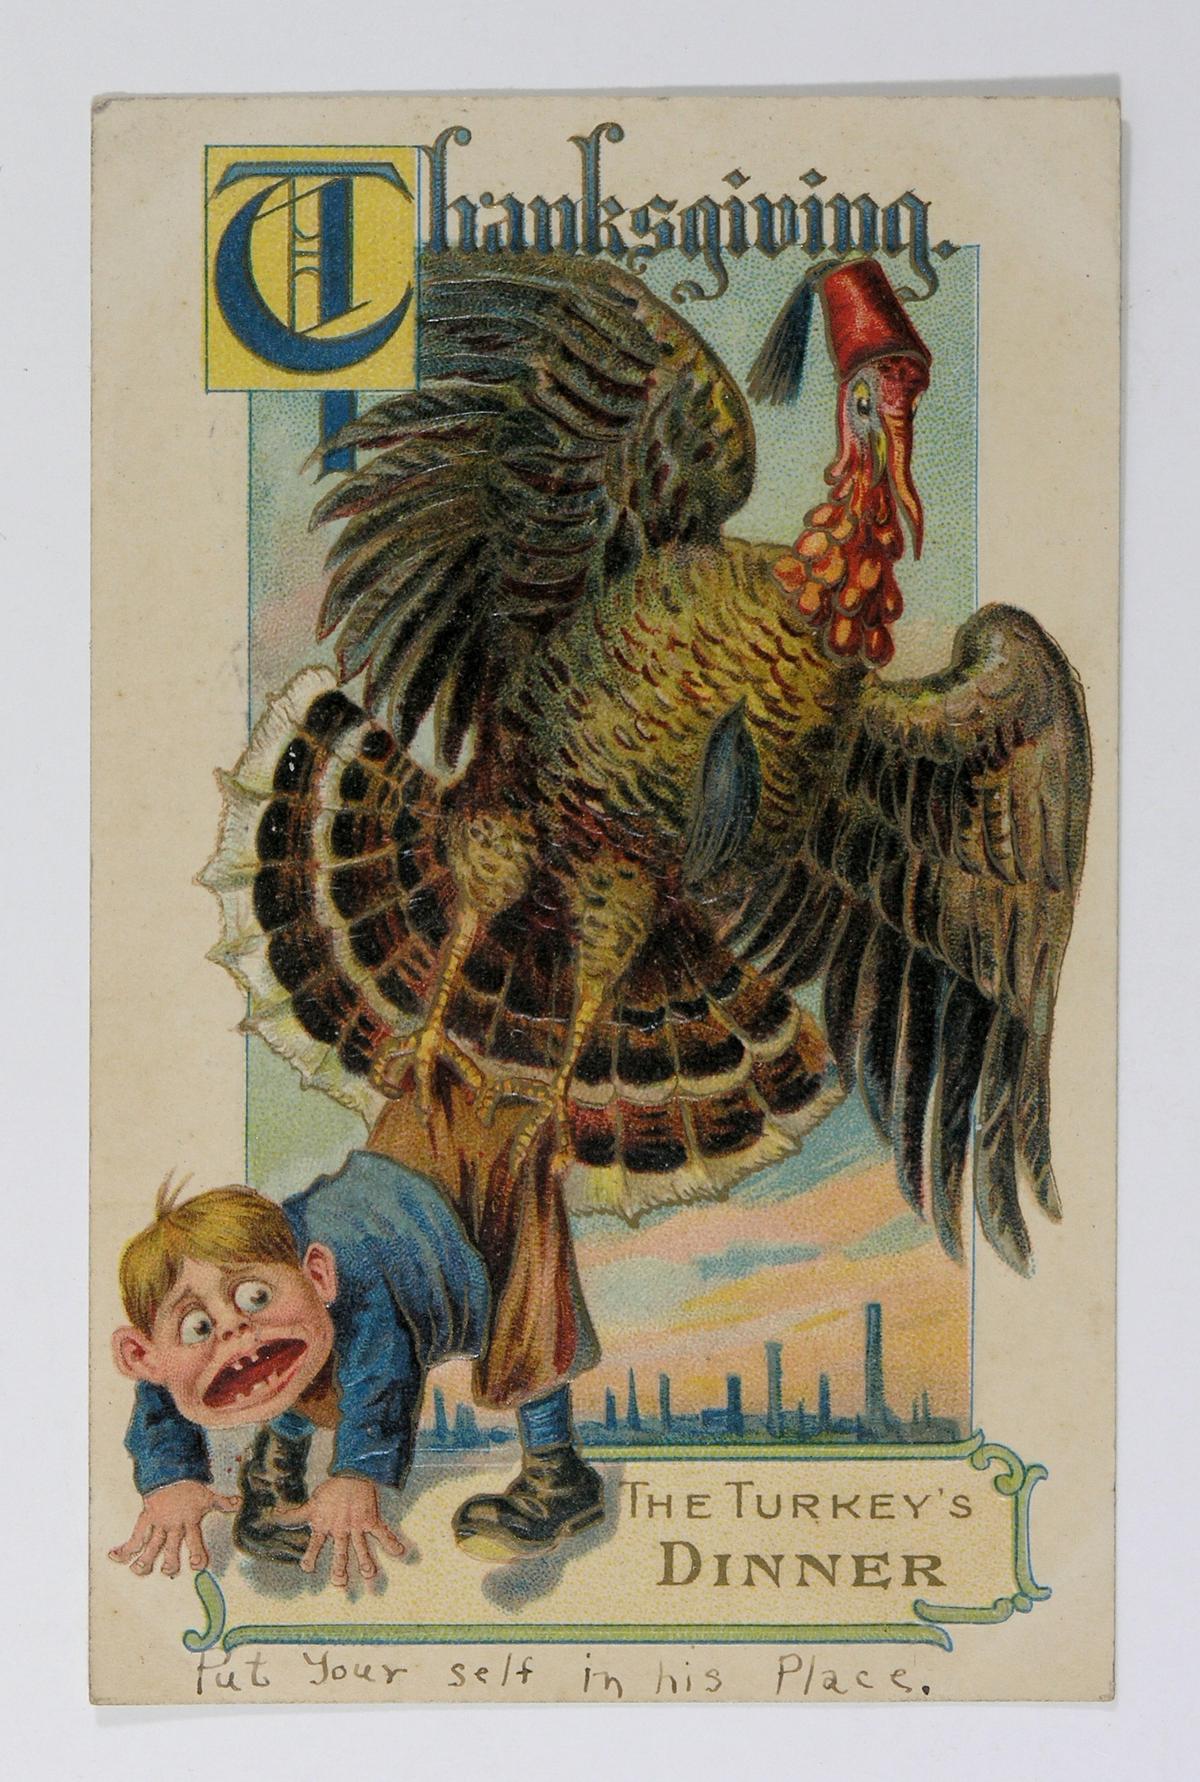 Vintage Post Card Postmarked 1911. A Turkeys Dinner "Put Youself In His Pla